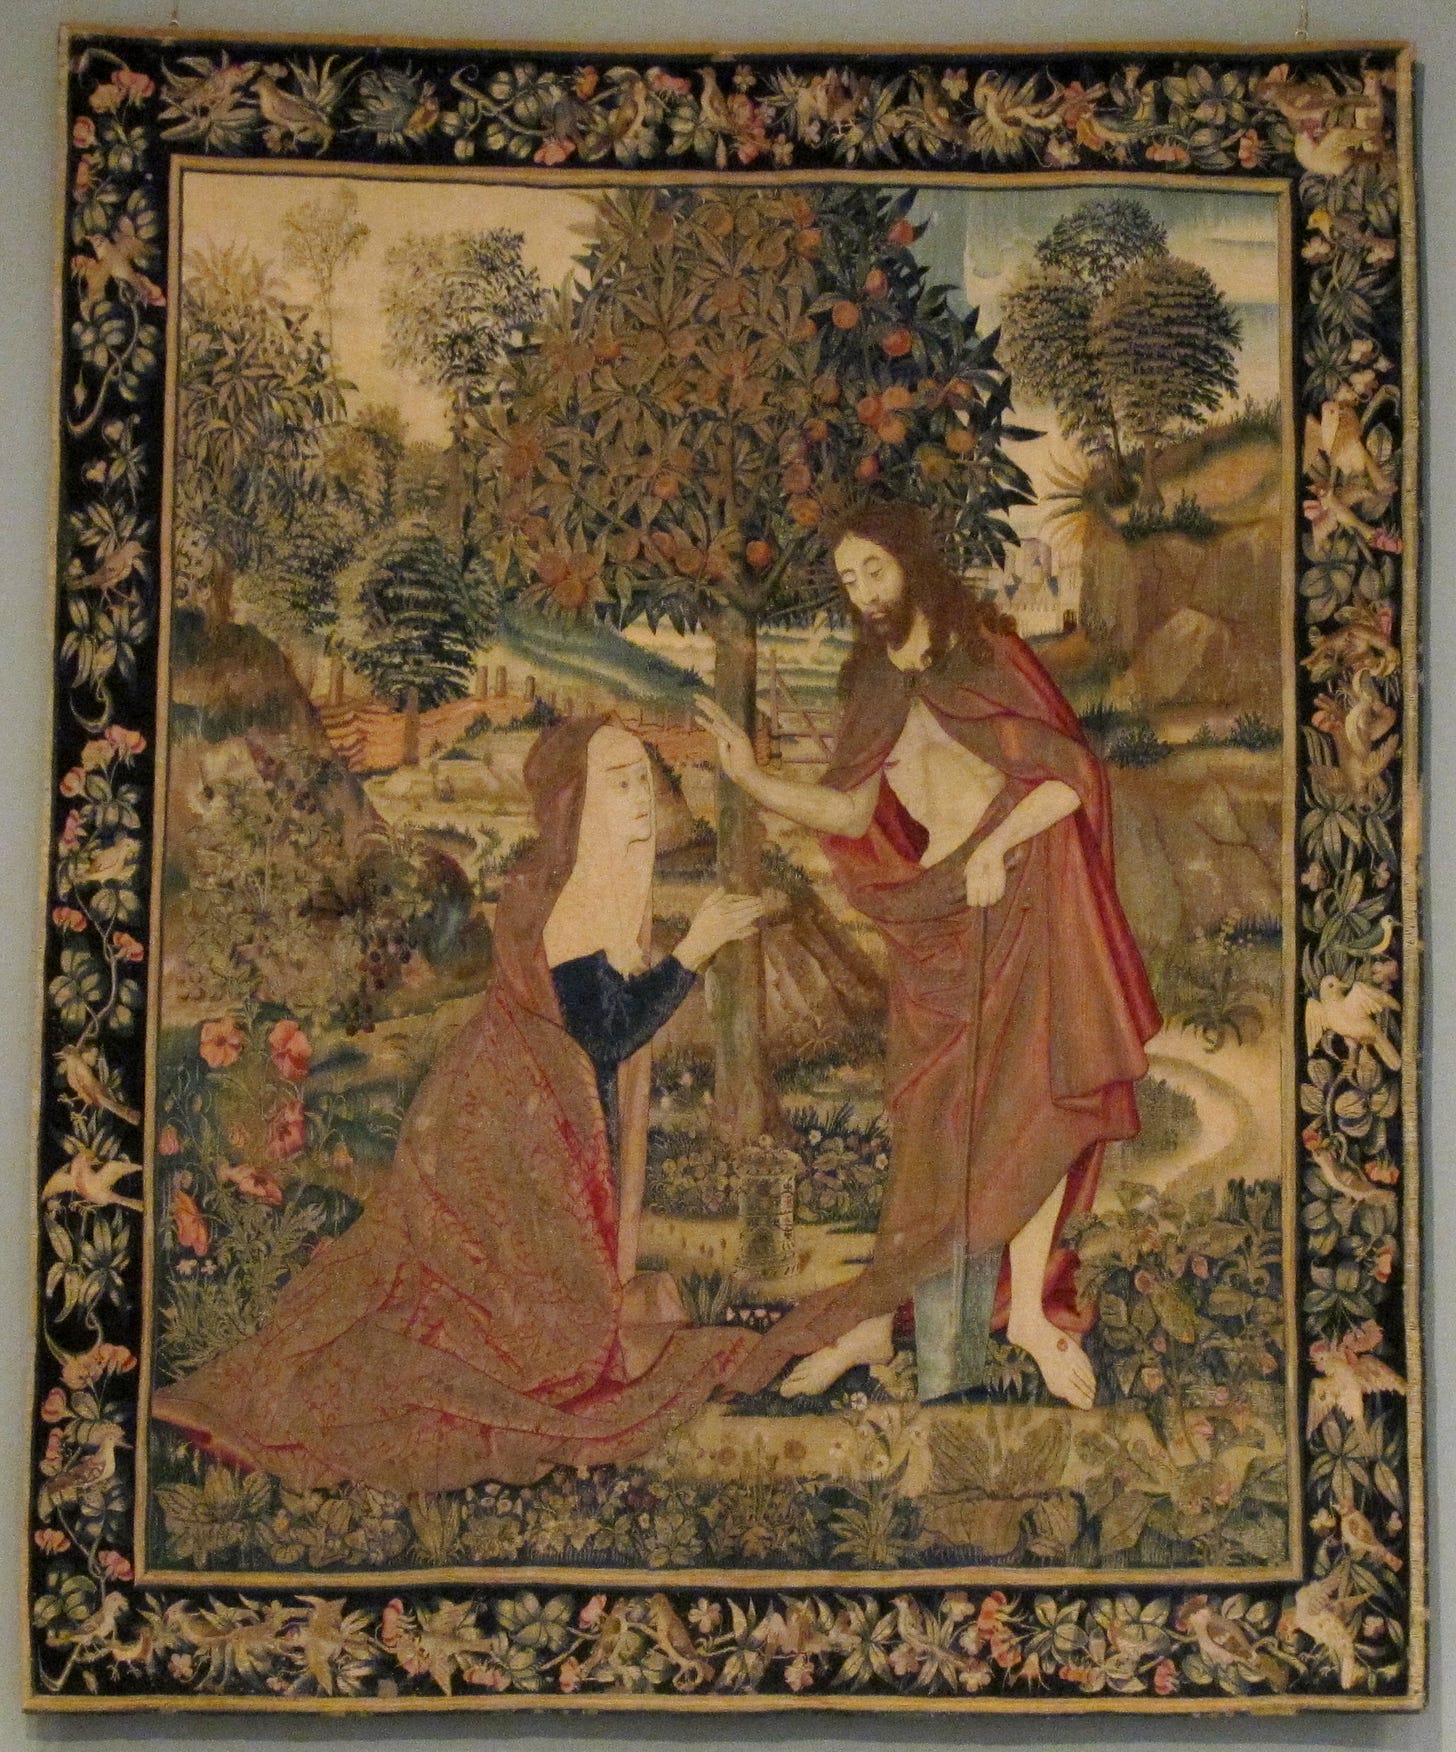 The Resurrected Christ Appearing to Mary Magdelene in the Garden, Wool warp;  wool, silk, and gilt wefts, South Netherlandish